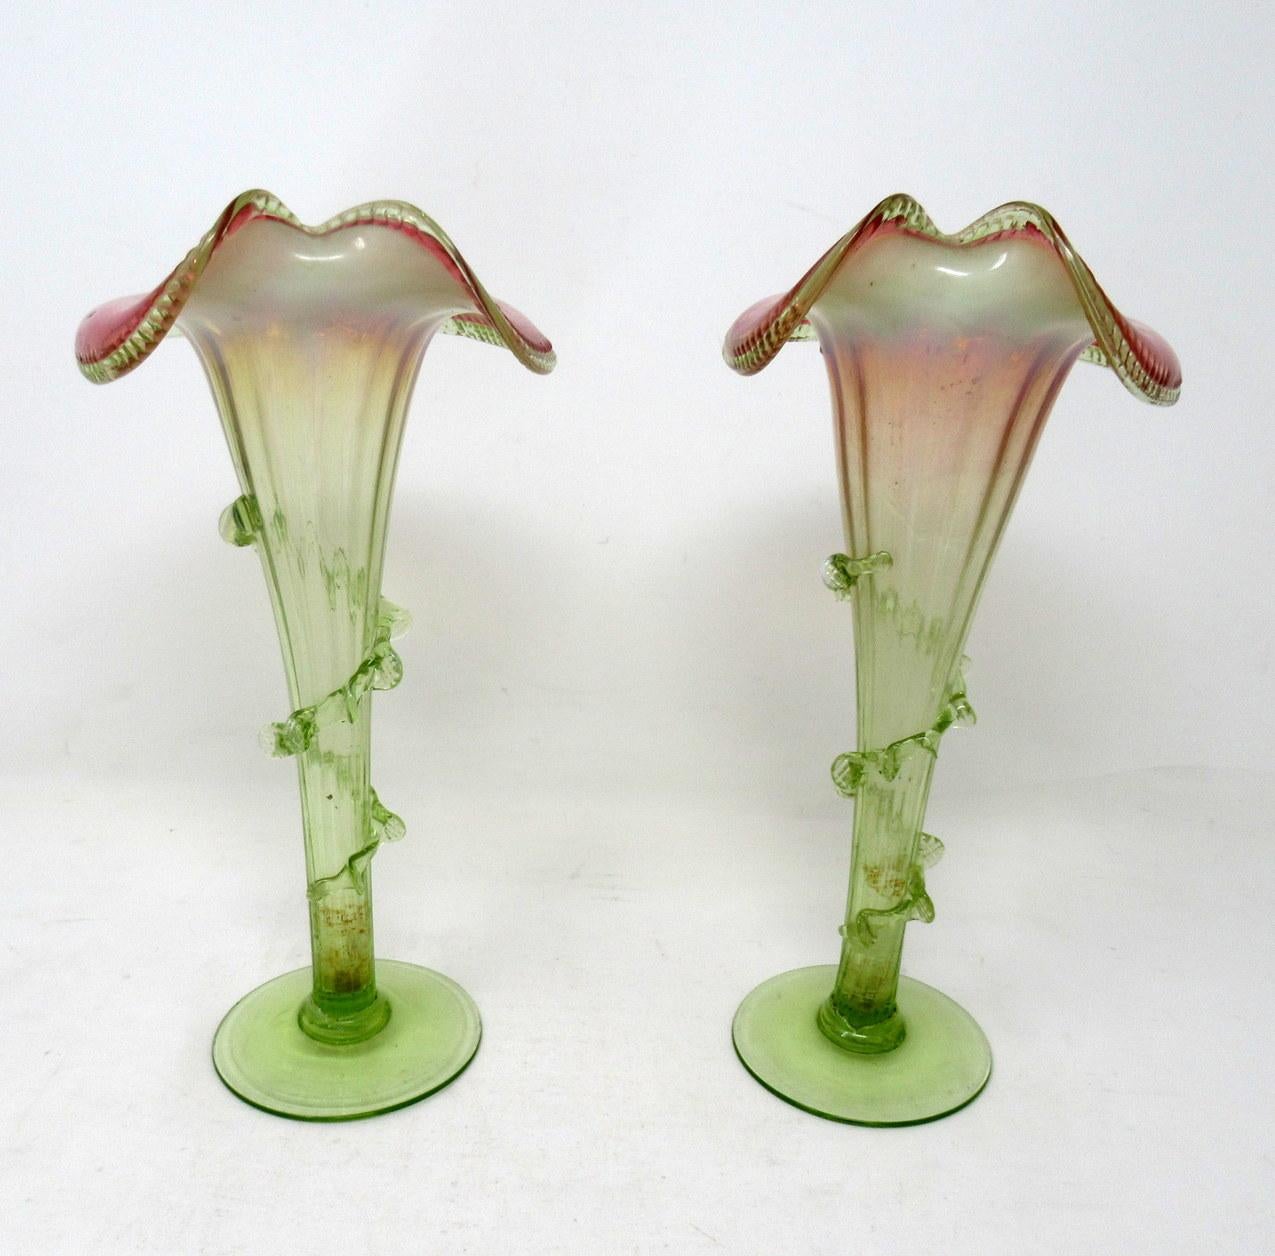 Early Victorian Pair of Jack in the Pulpit Victorian Iridescent Glass Flower Vases Thomas Webb